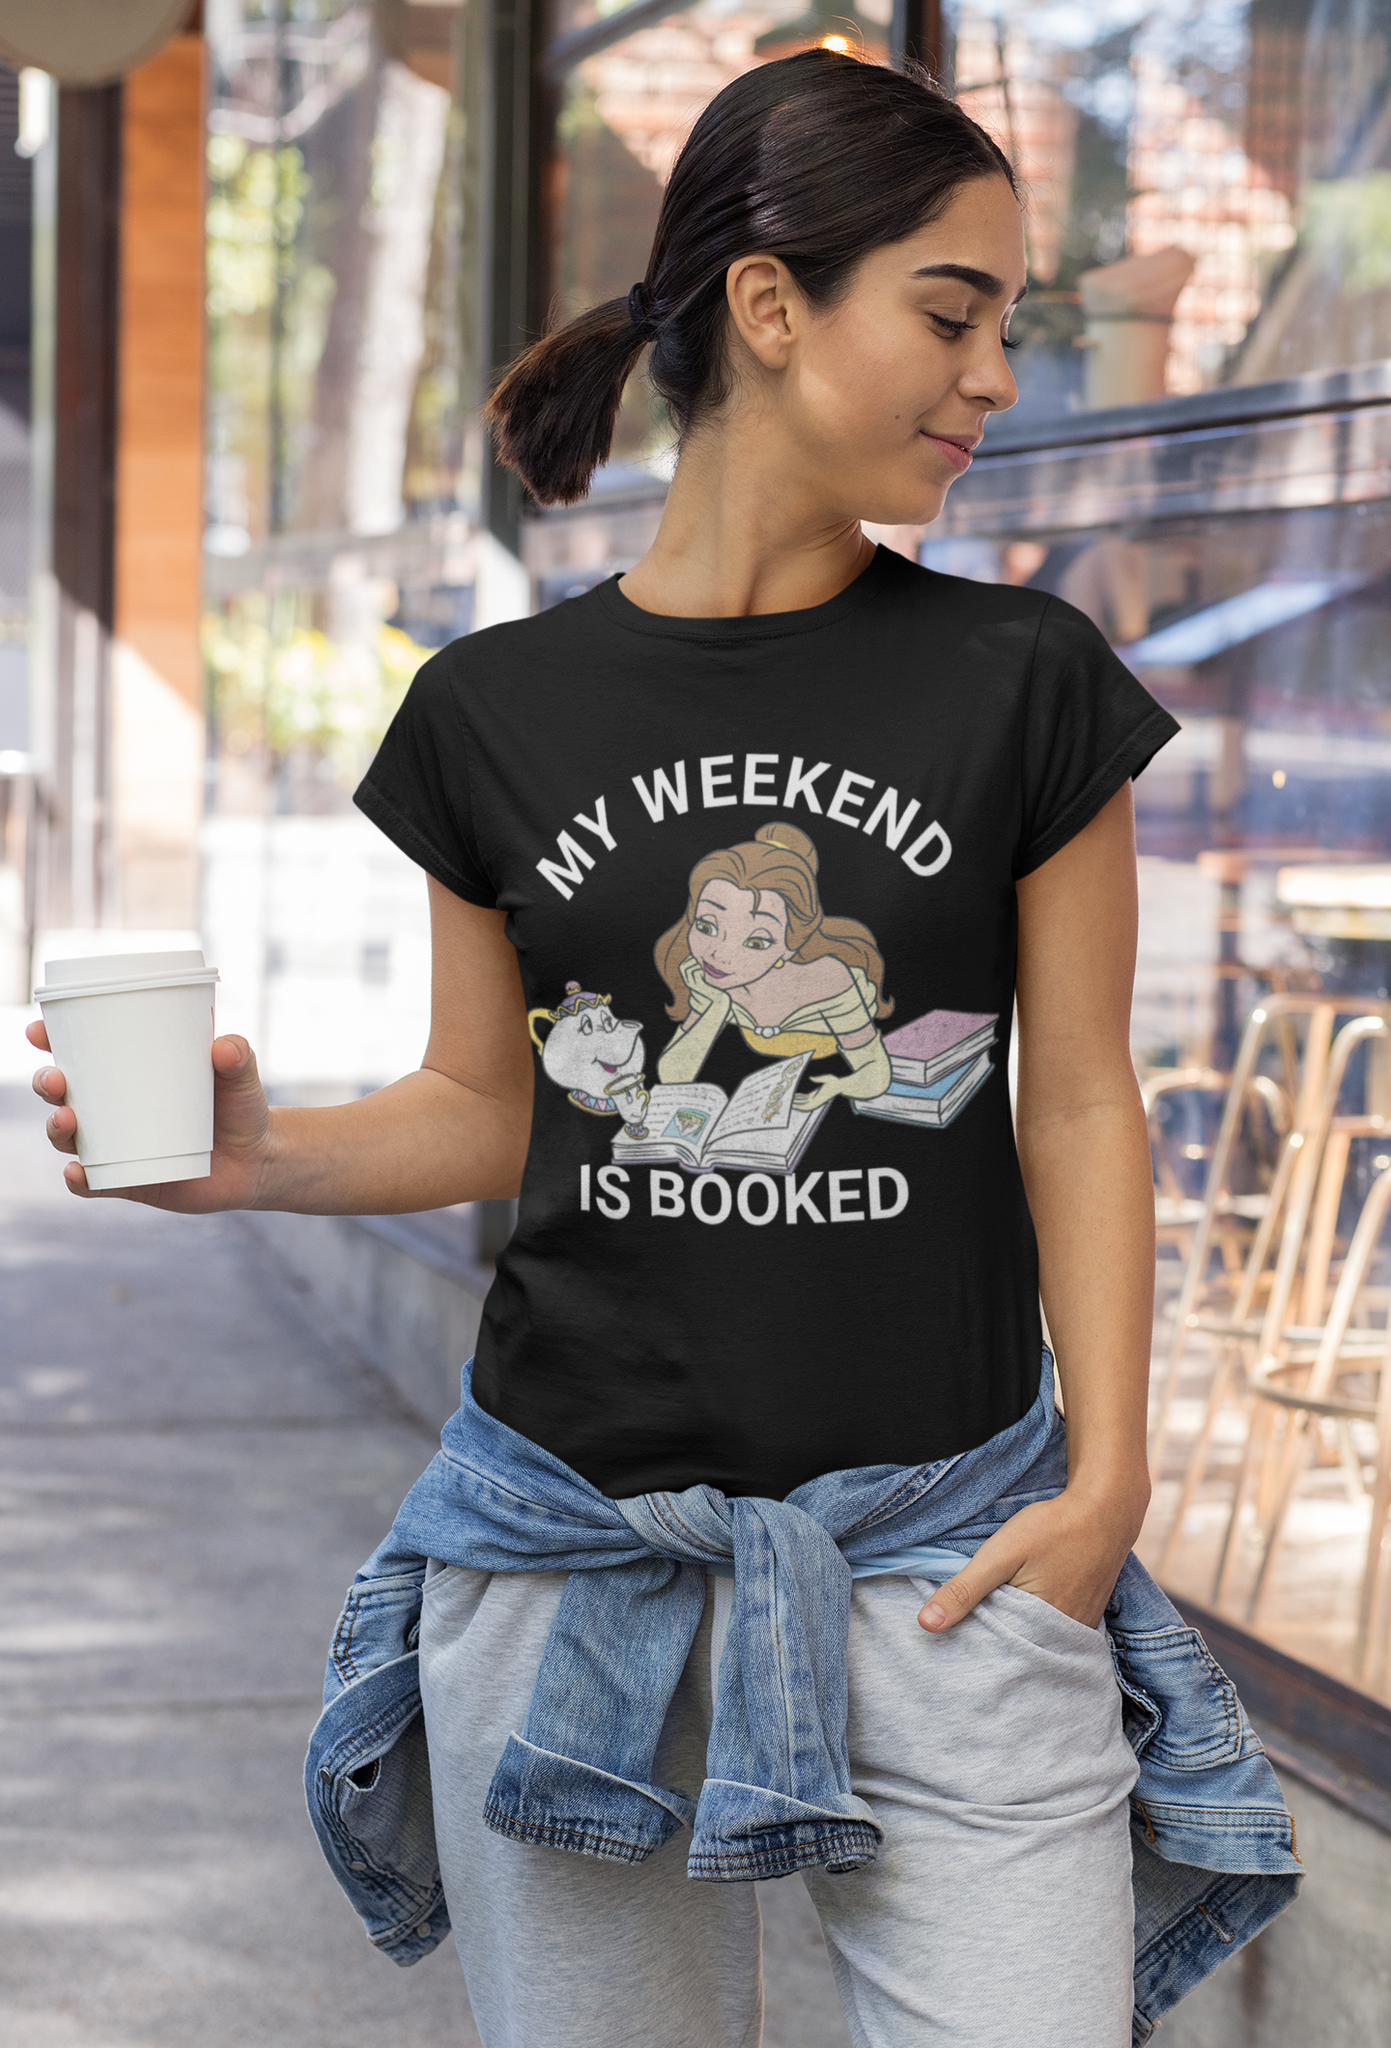 Disney Beauty And The Beast T Shirt, My Weekend Is Booked Tshirt, Belle Mrs Potts and Chip T Shirt